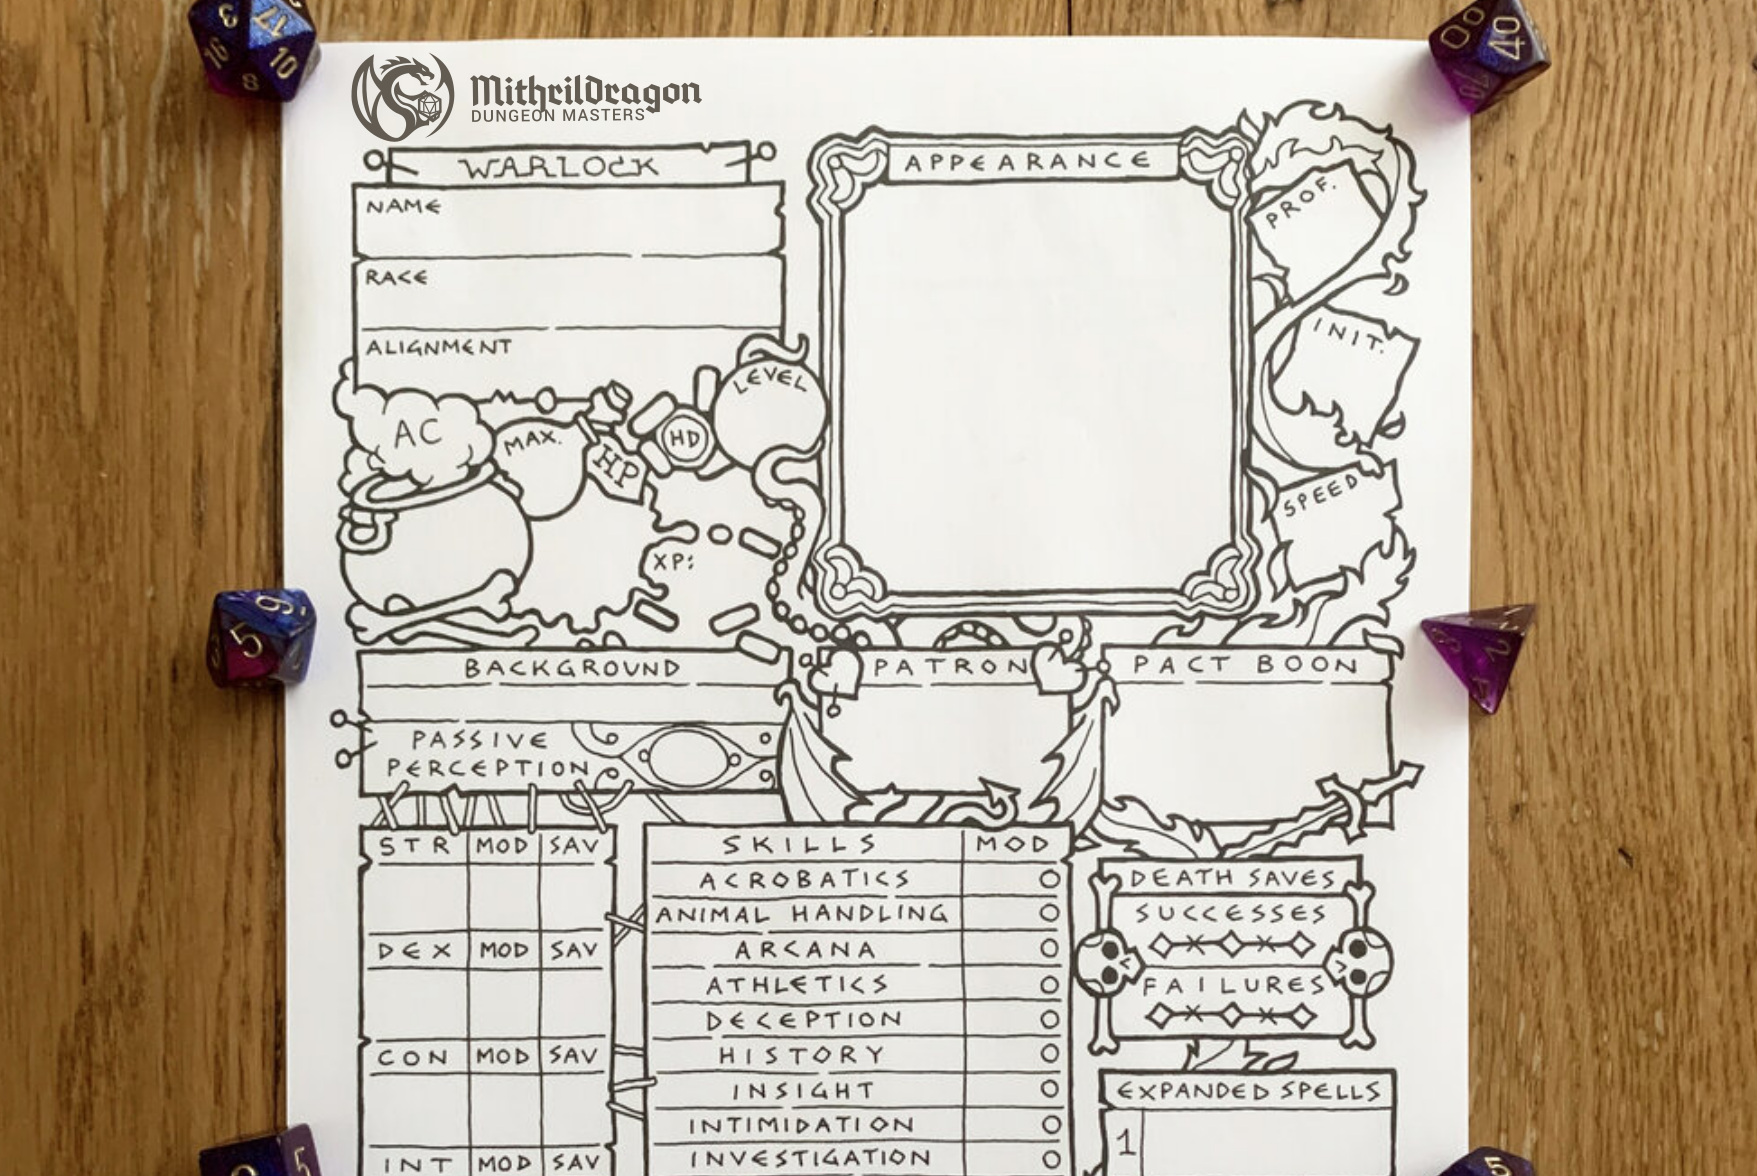 The Mithril Dragon Dungeon Masters logo displayed on a D&D character sheet